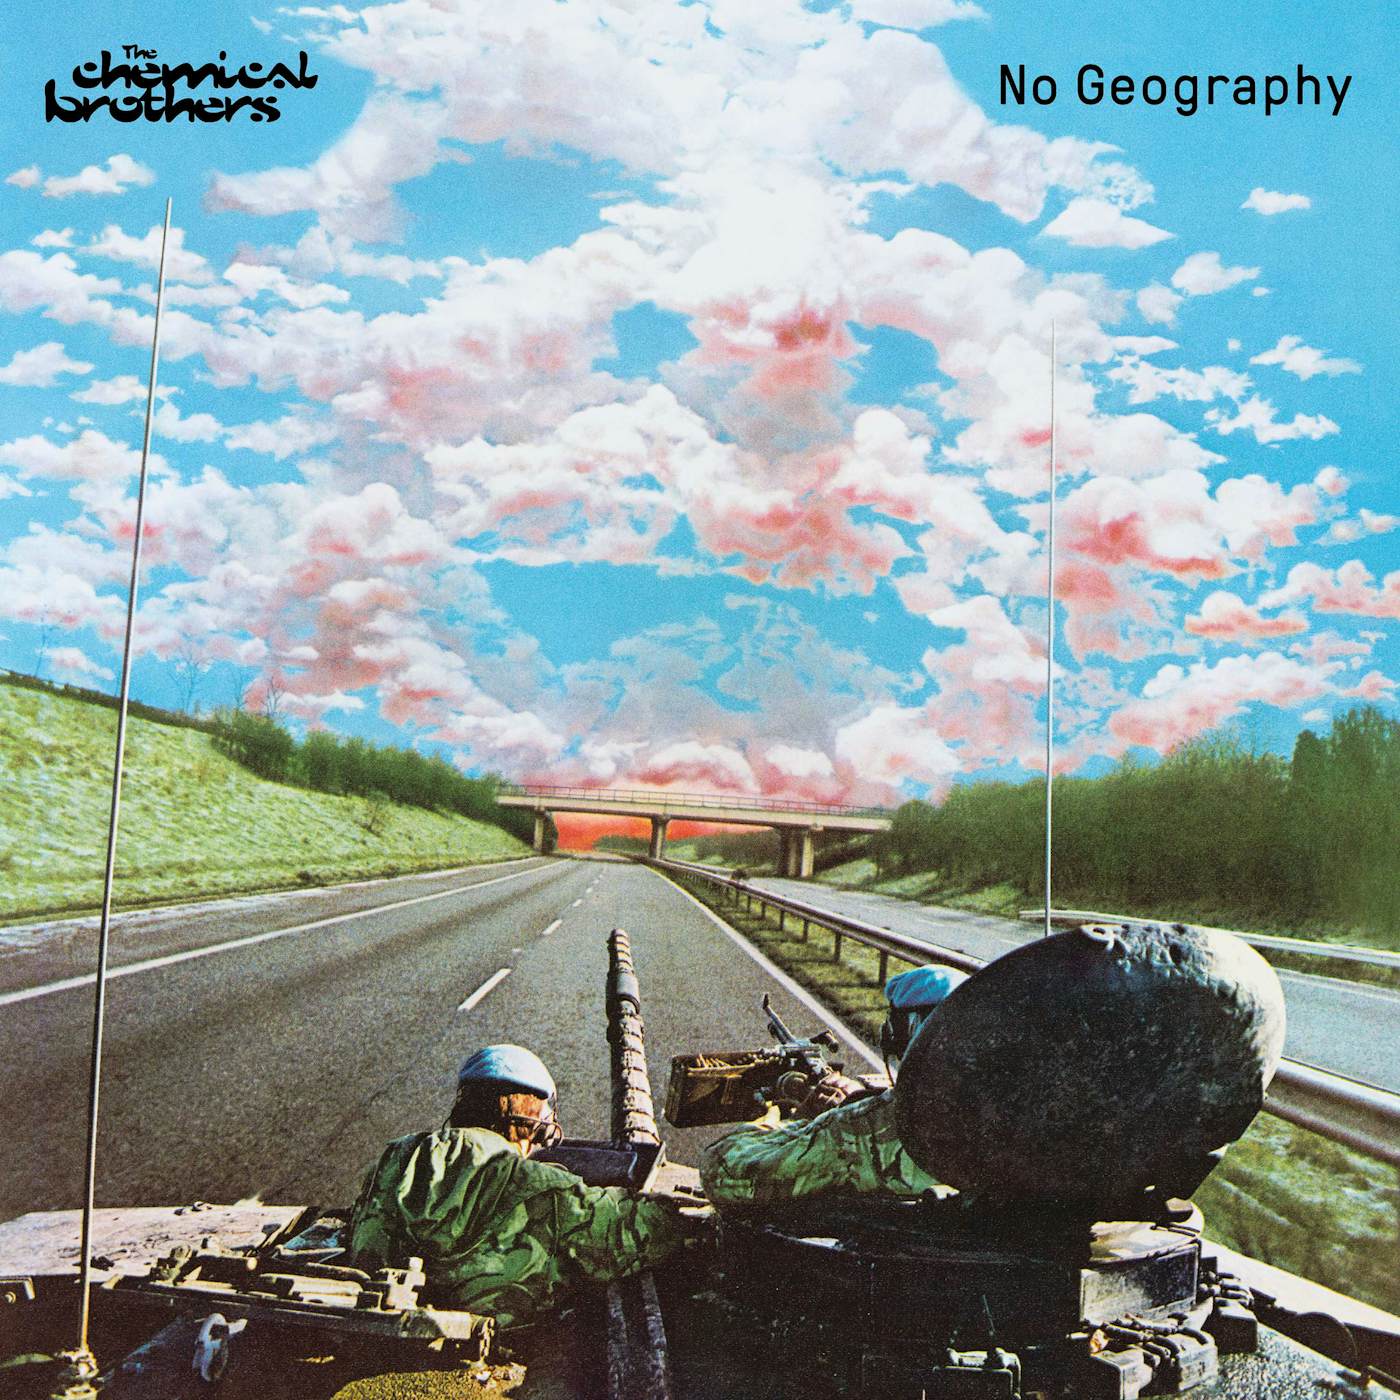 The Chemical Brothers No Geography Vinyl Record